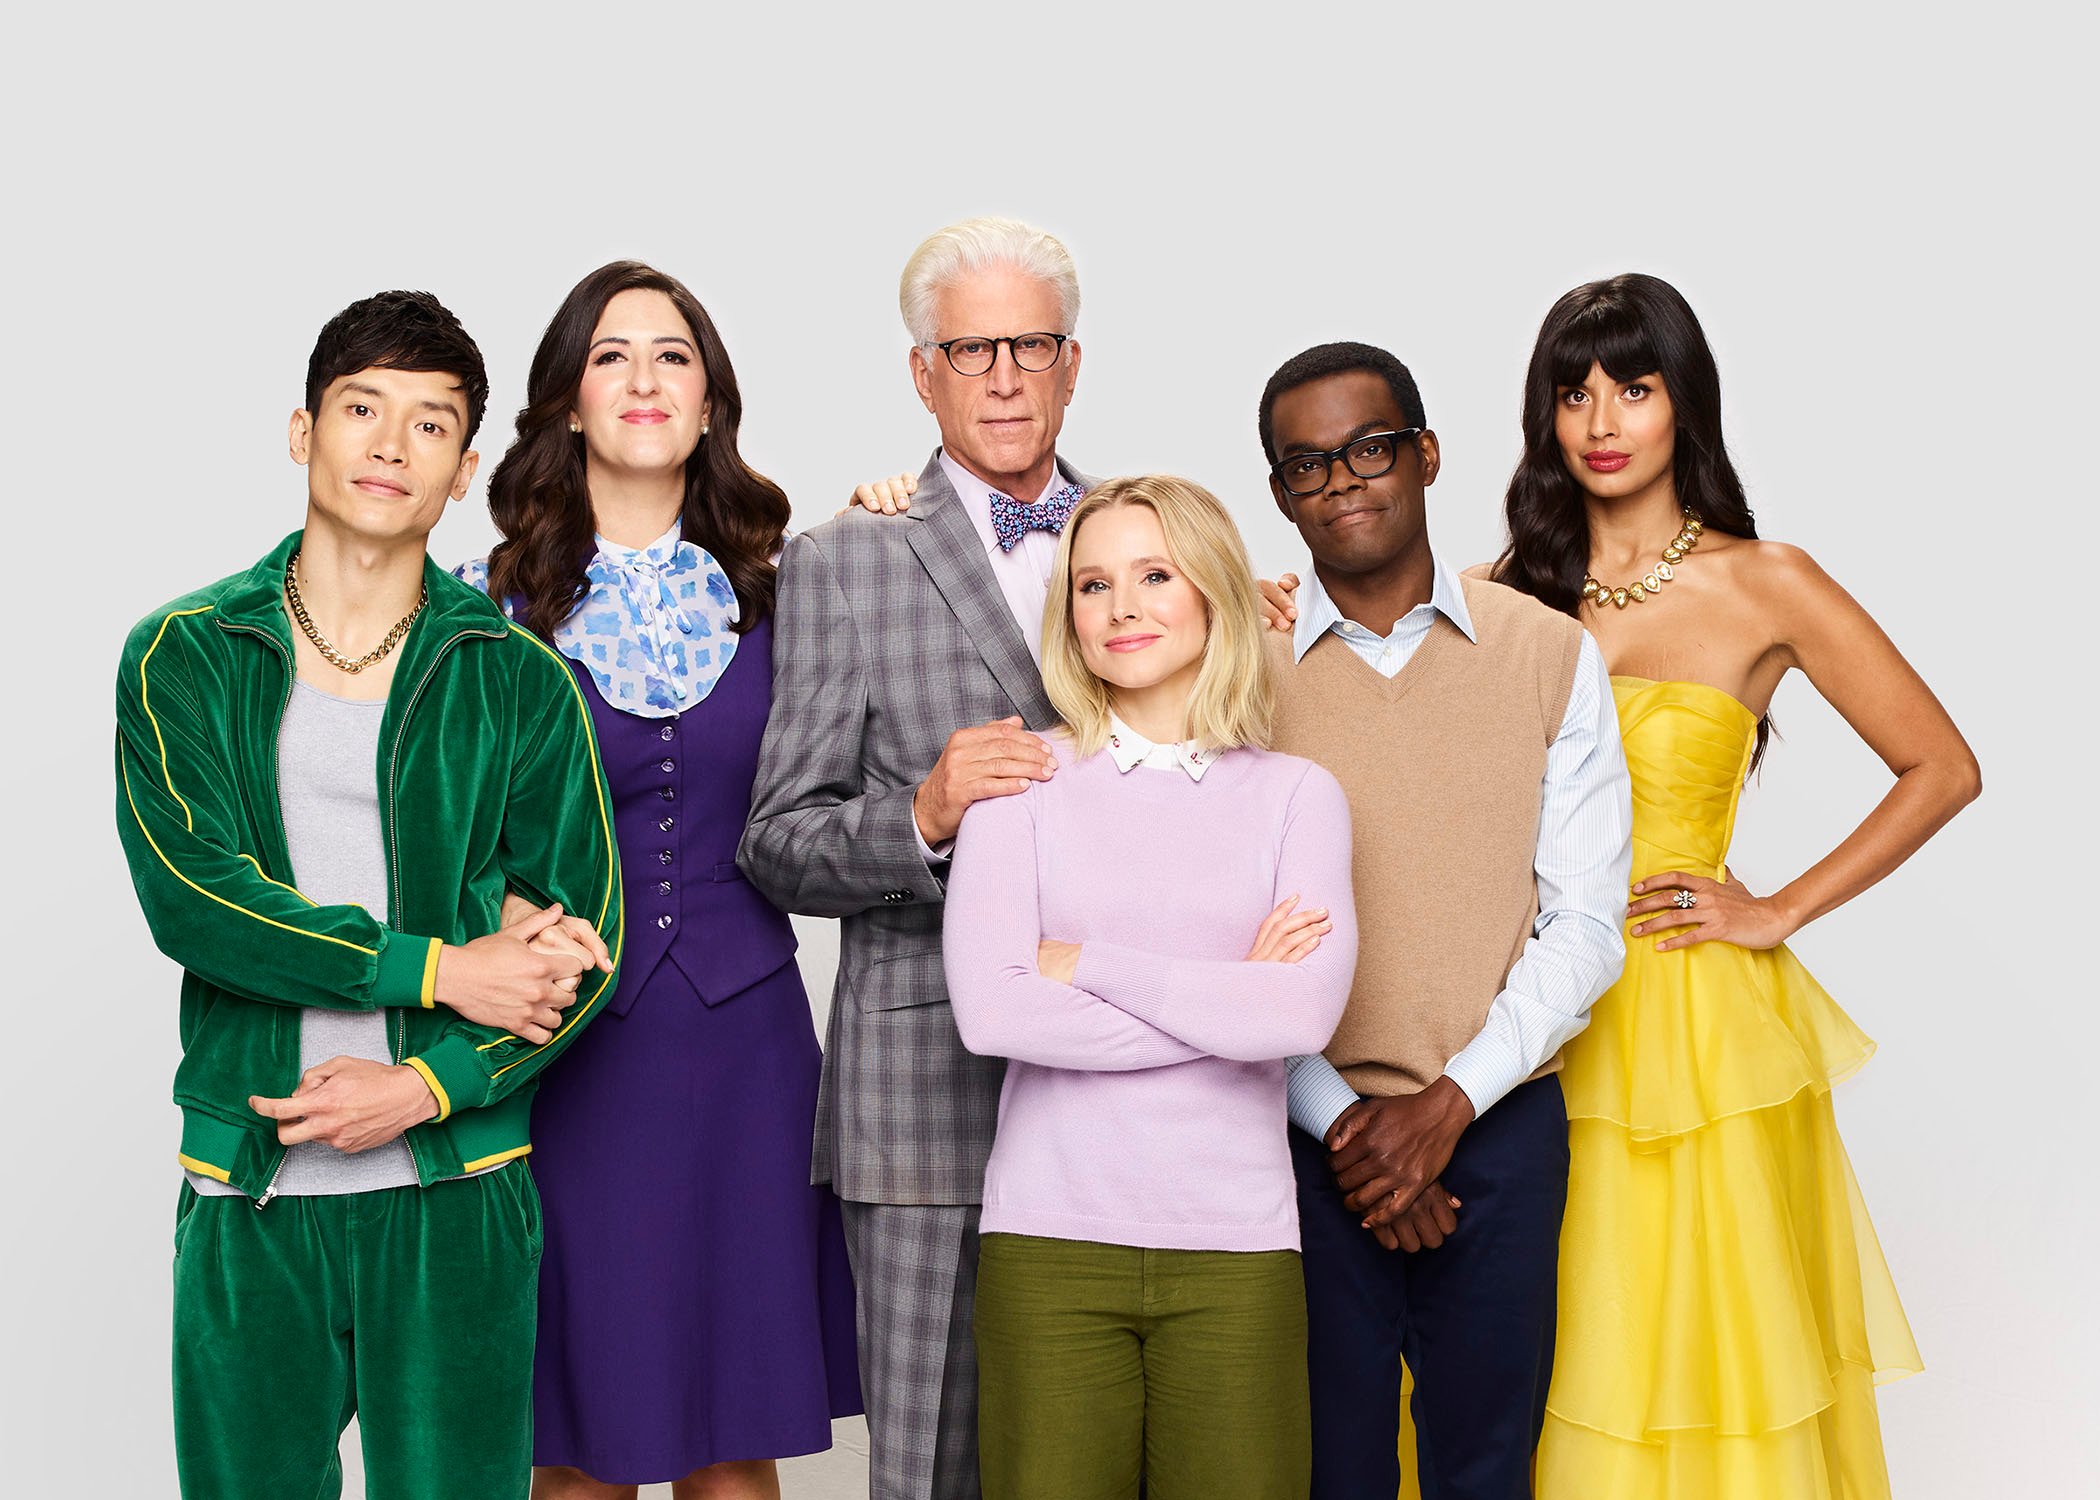 Manny Jacinto, D'Arcy Carden, Ted Danson, Kristen Bell, William Jackson Harper, D'Arcy Carden, and Jameela Jamil of 'The Good Place' 